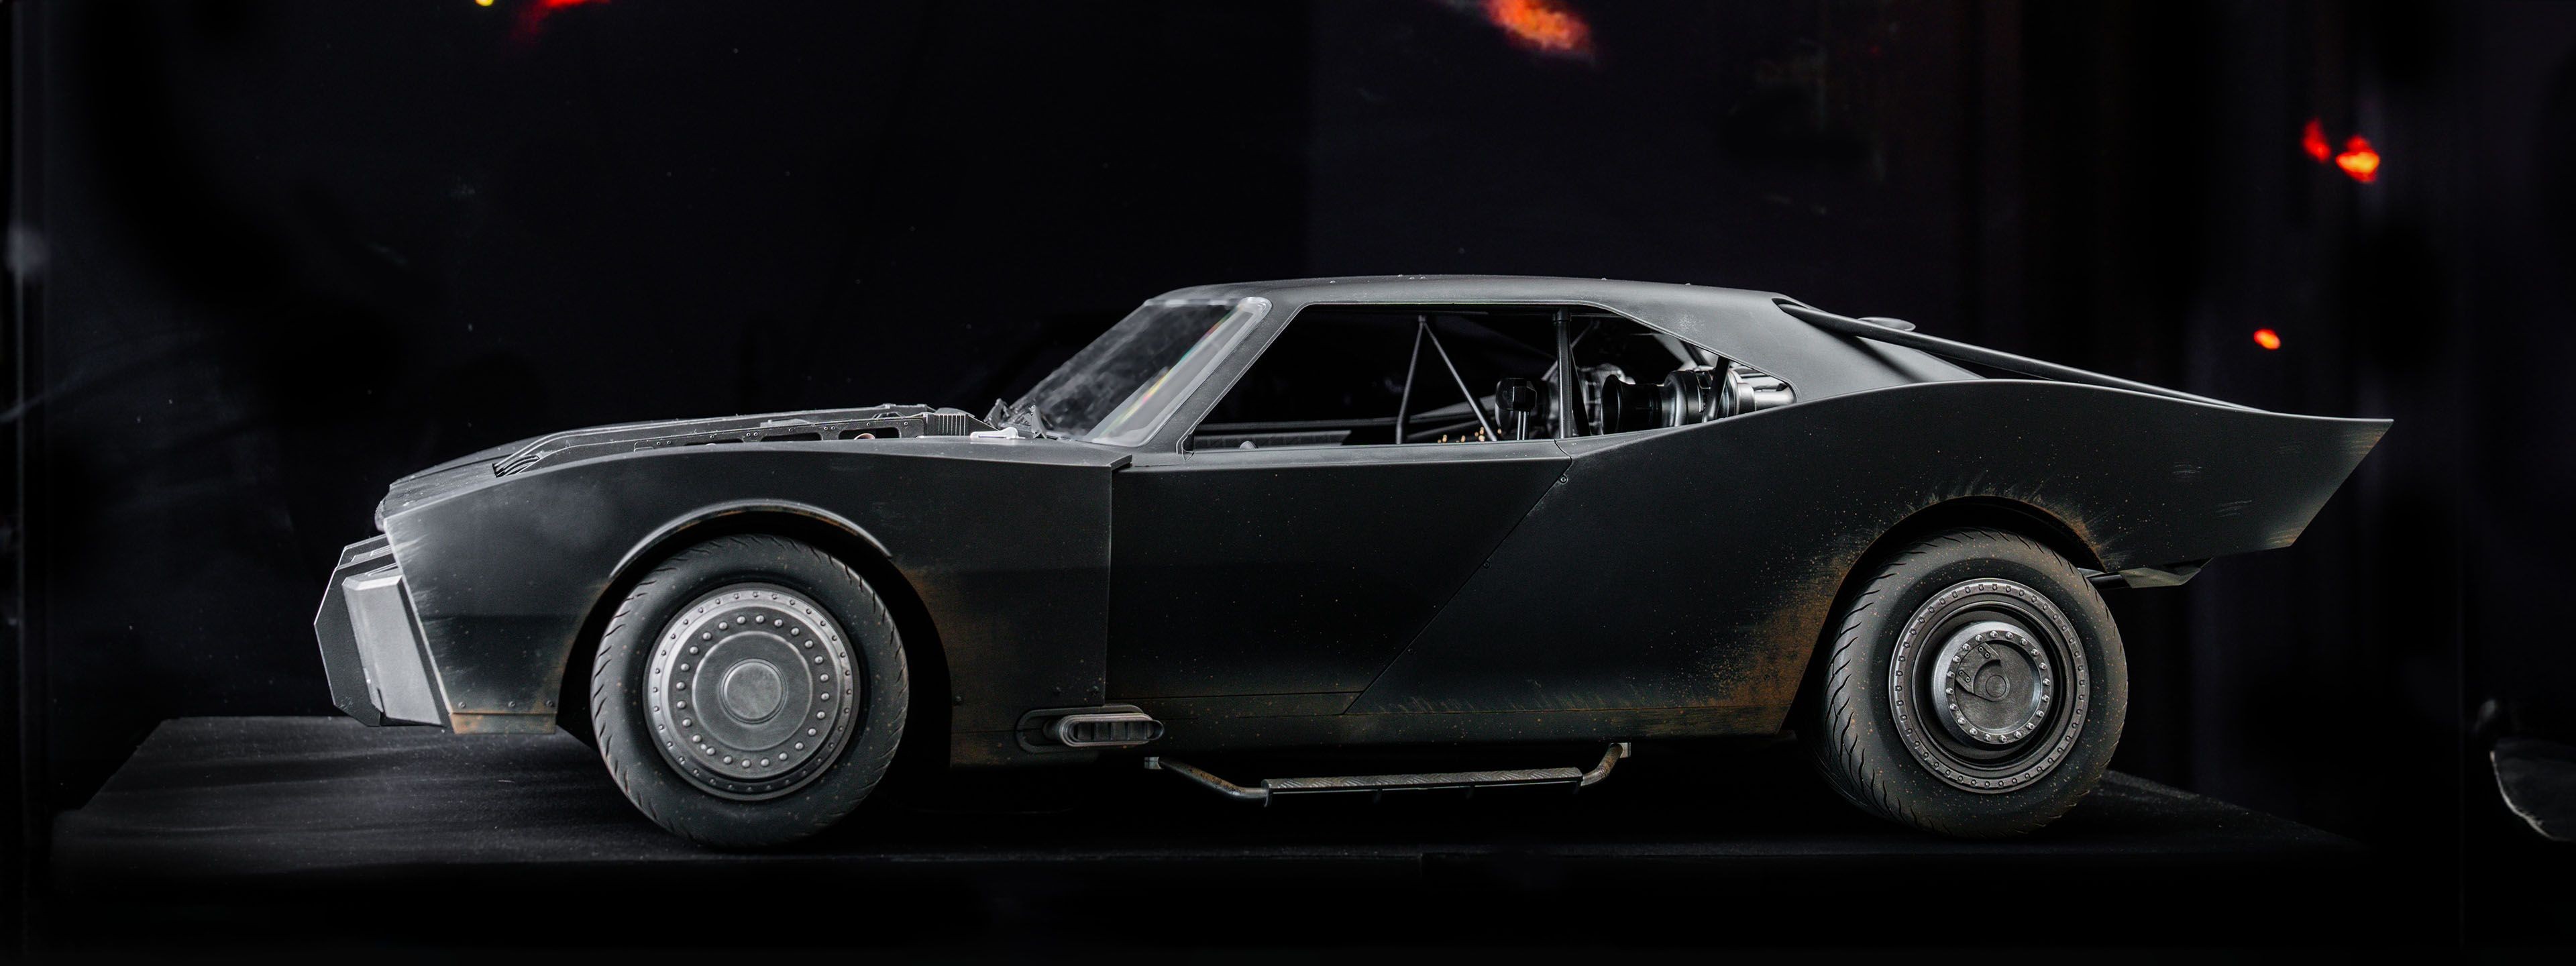 The Batman Batmobile (Weathered Version) 1/6 Scale Limited Edition Collectible Vehicle